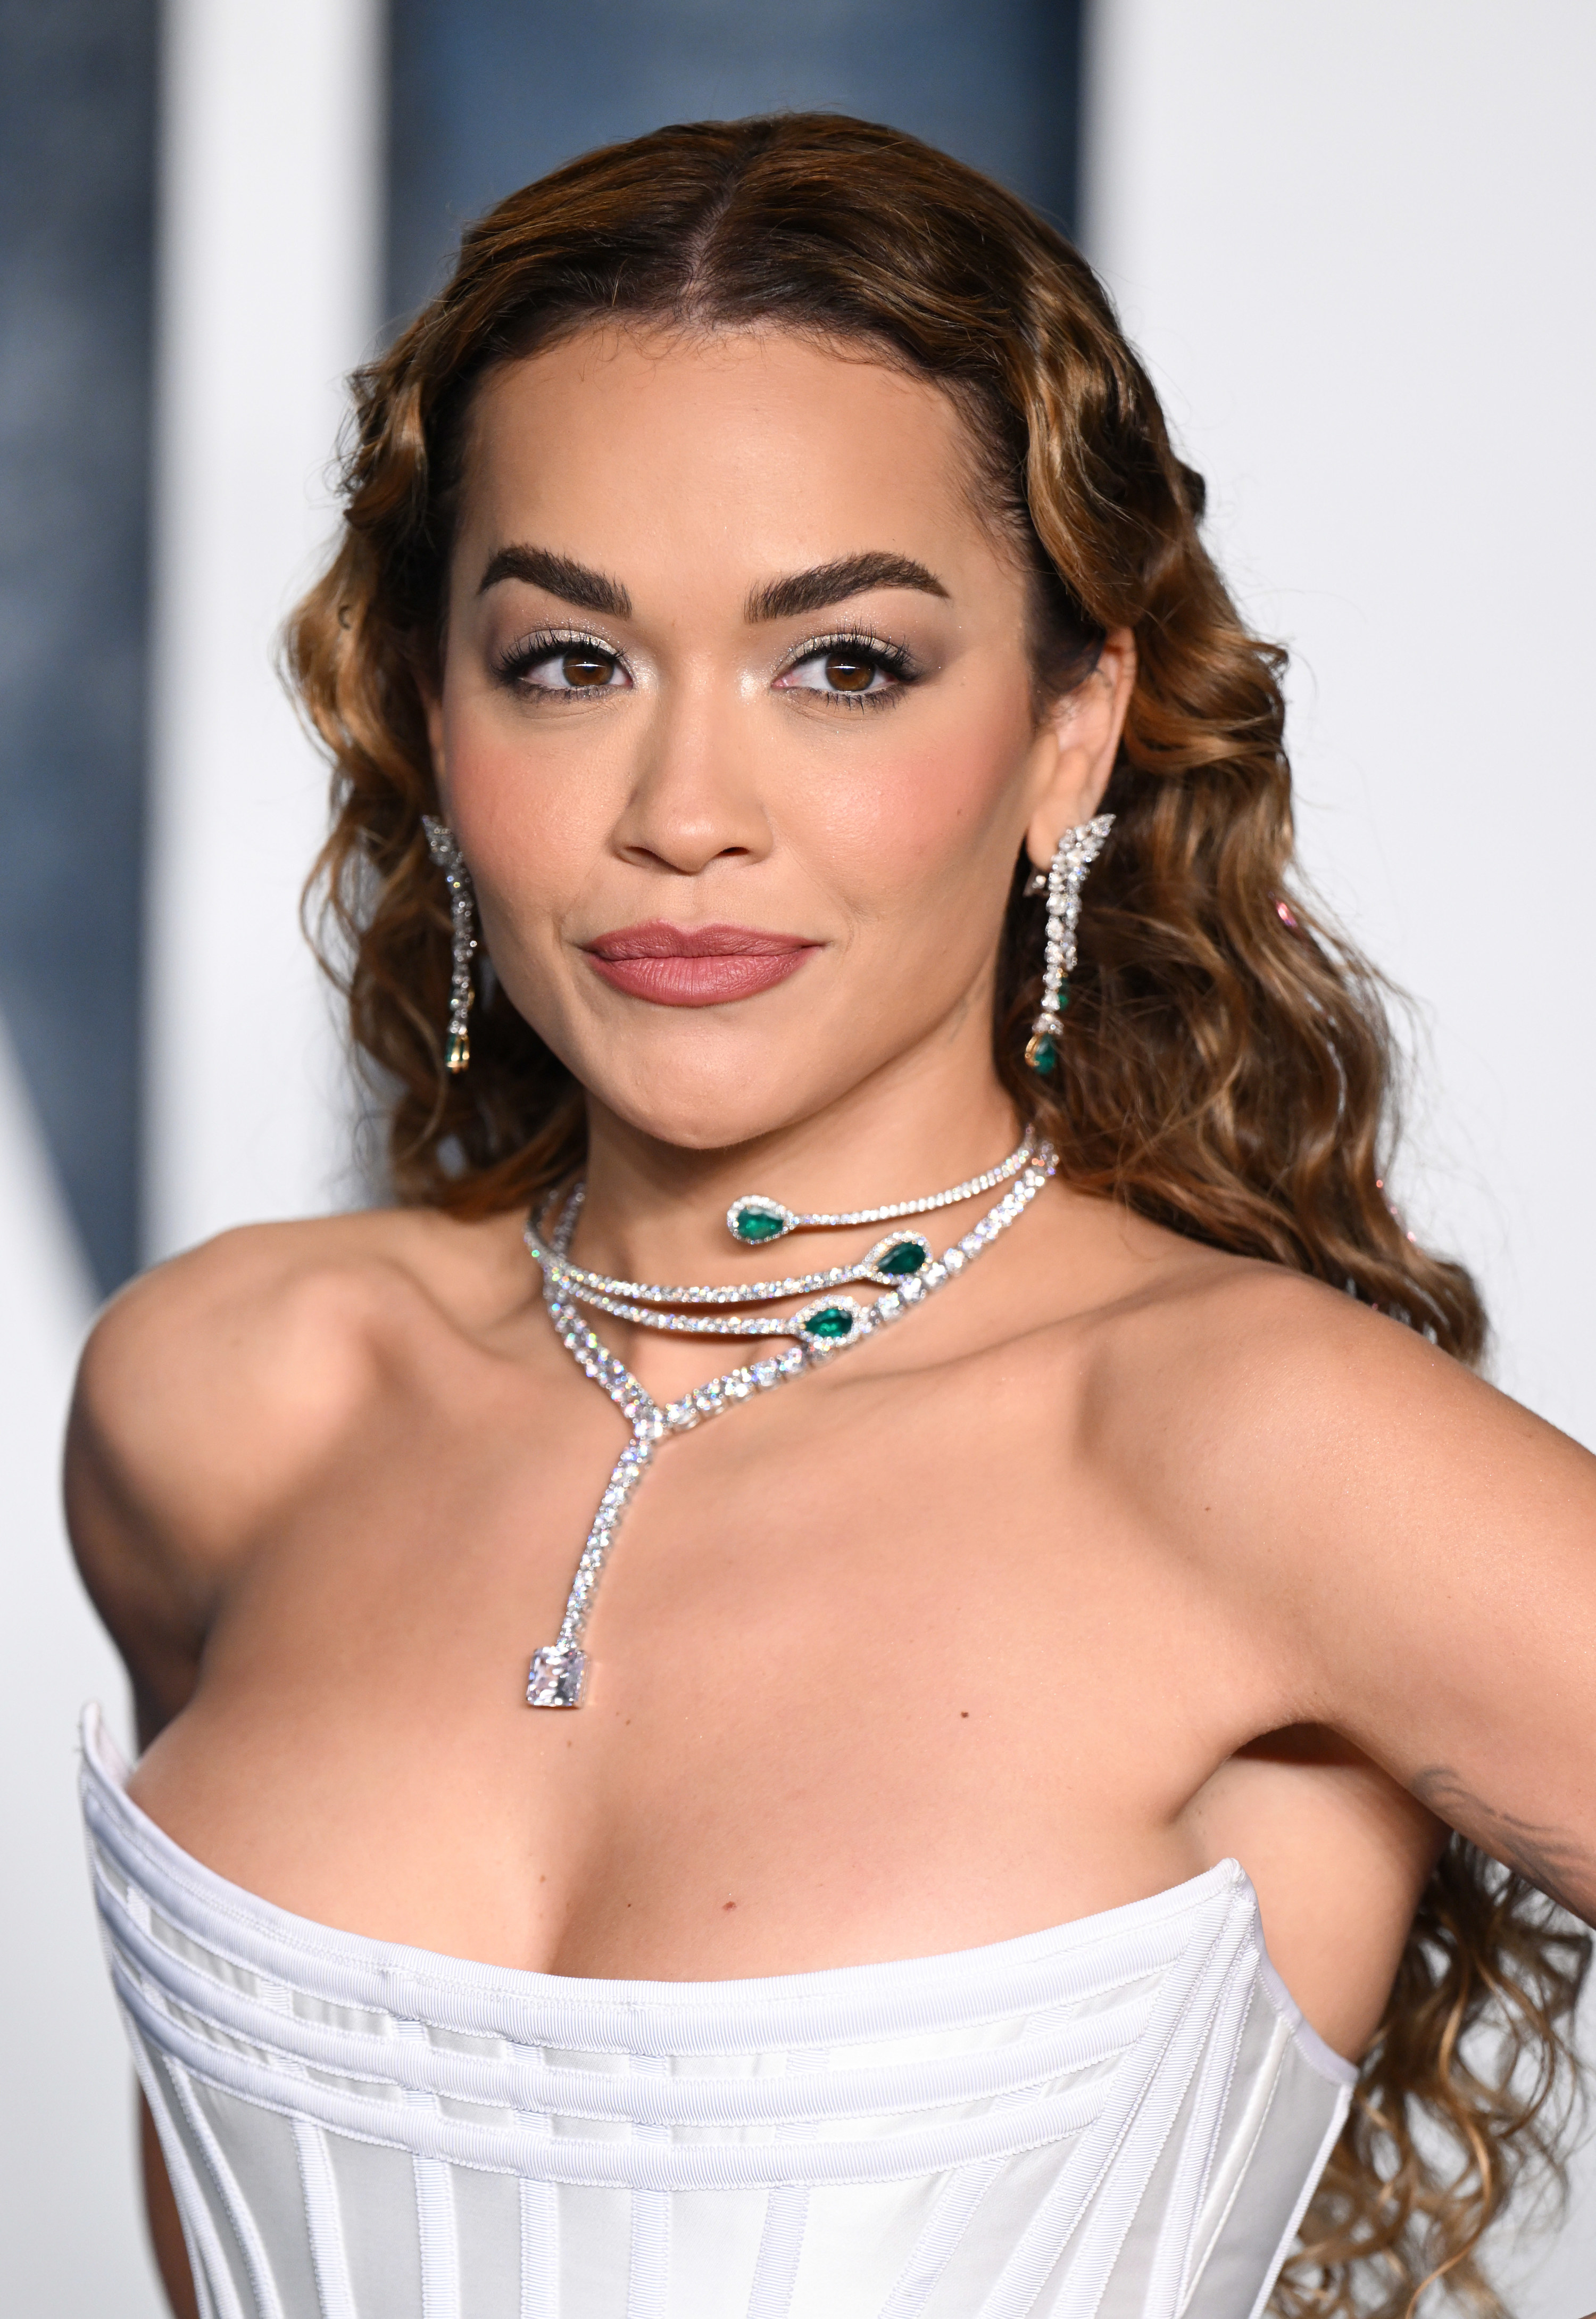 Rita Ora attends the 2023 Vanity Fair Oscar Party. Rita is wearing a strapless dress with a scooped neckline and a diamond and emerald necklace